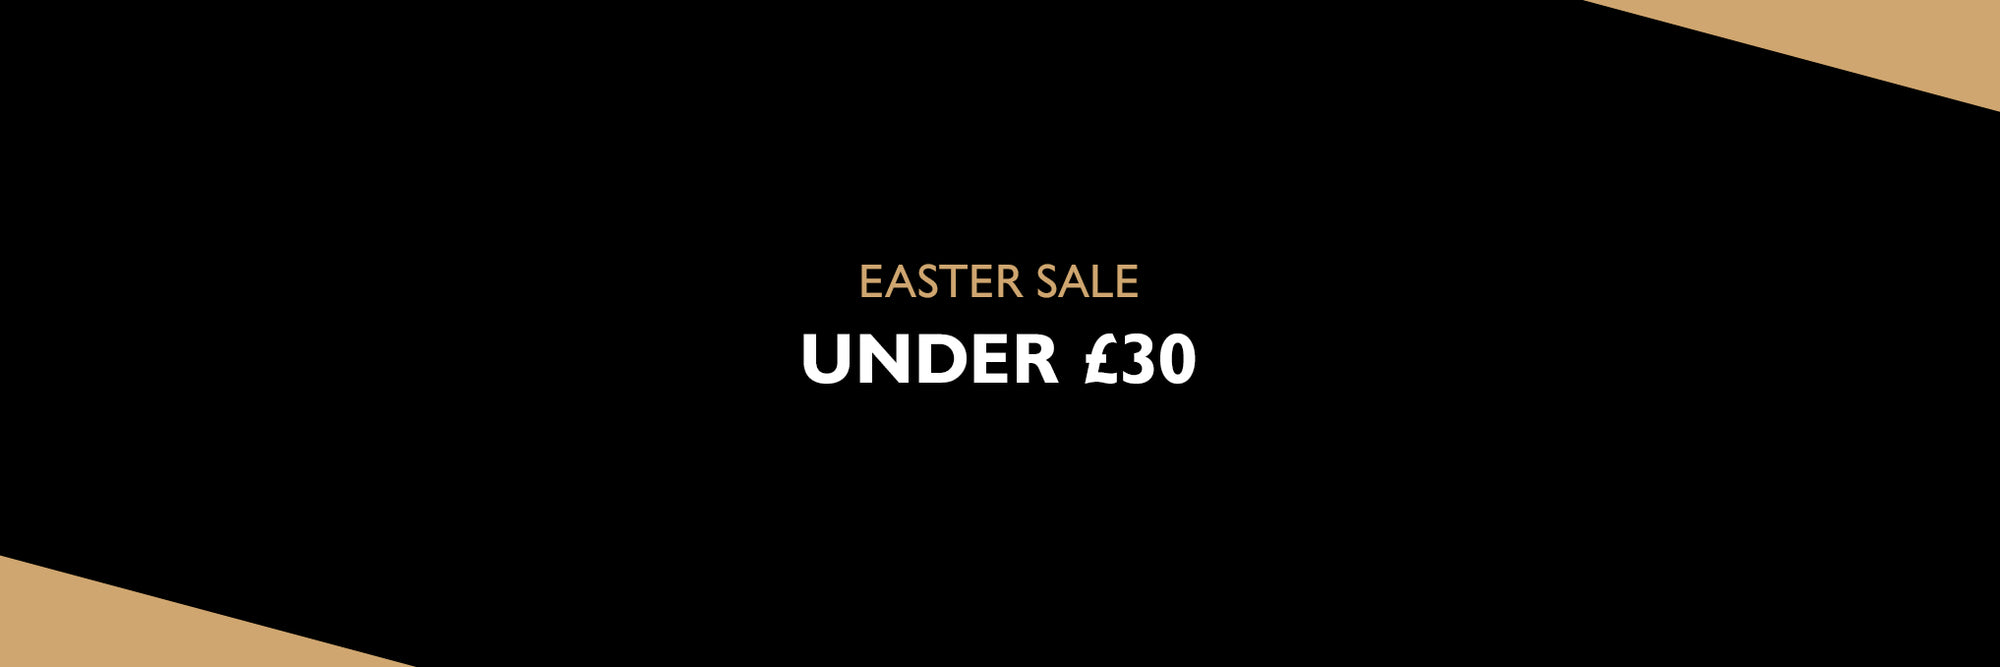 Easter Sale - £30 Or Less